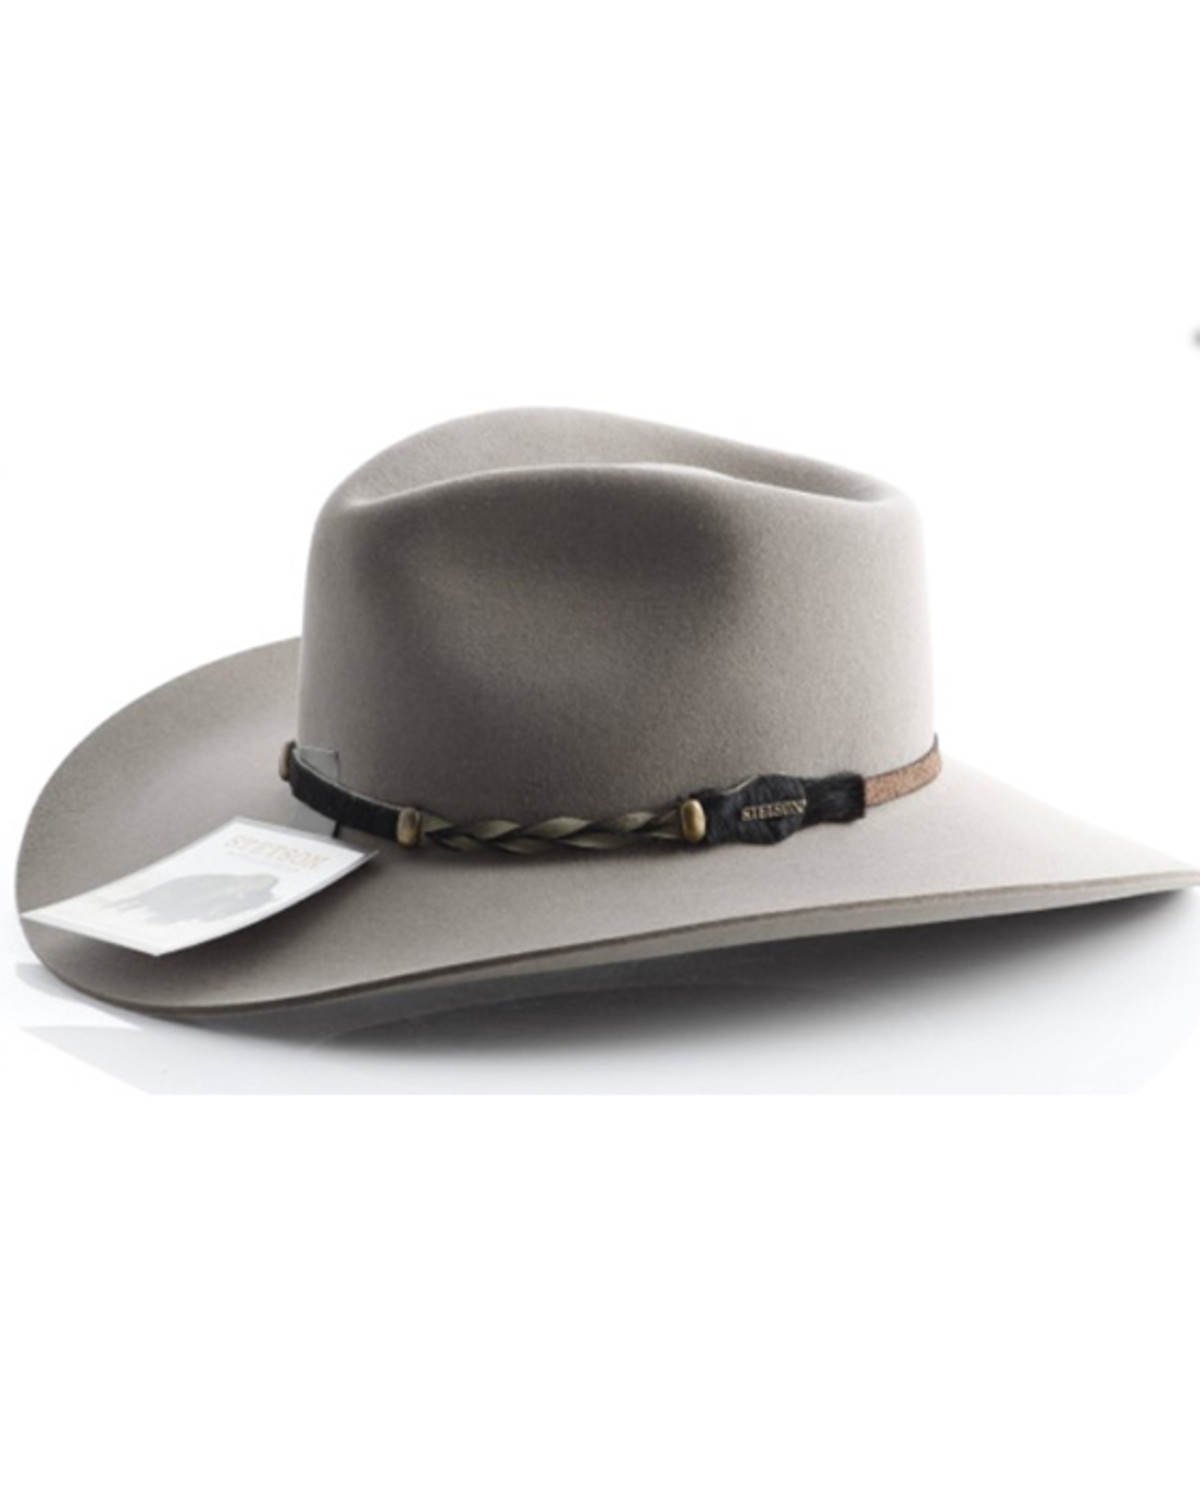 Men's Outback & Crushable Hats